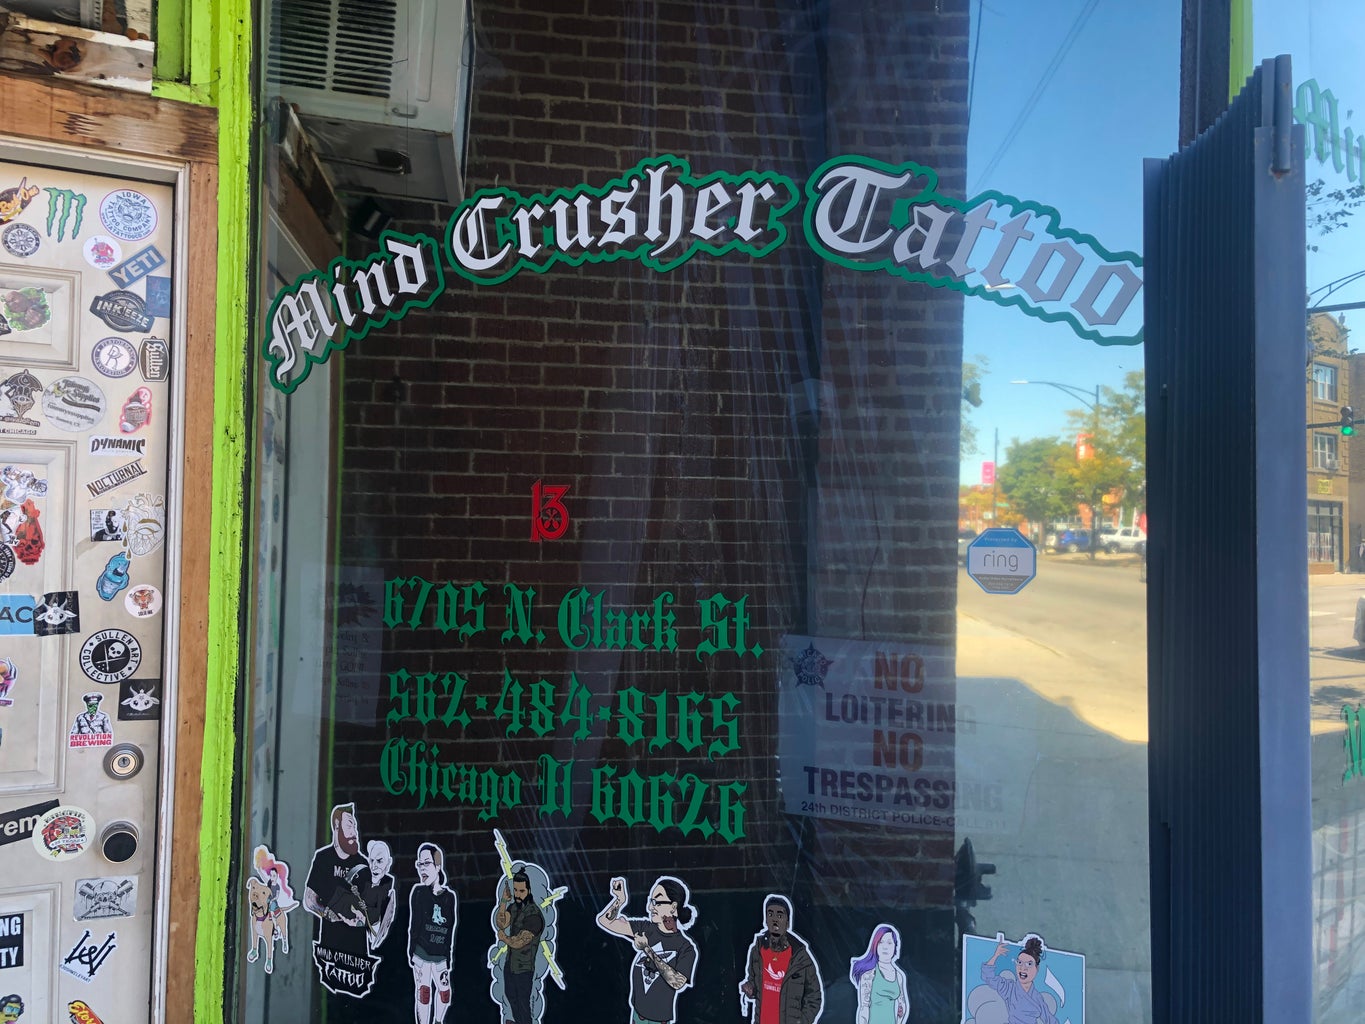 Photo of the tattoo shop I am talking about in the article